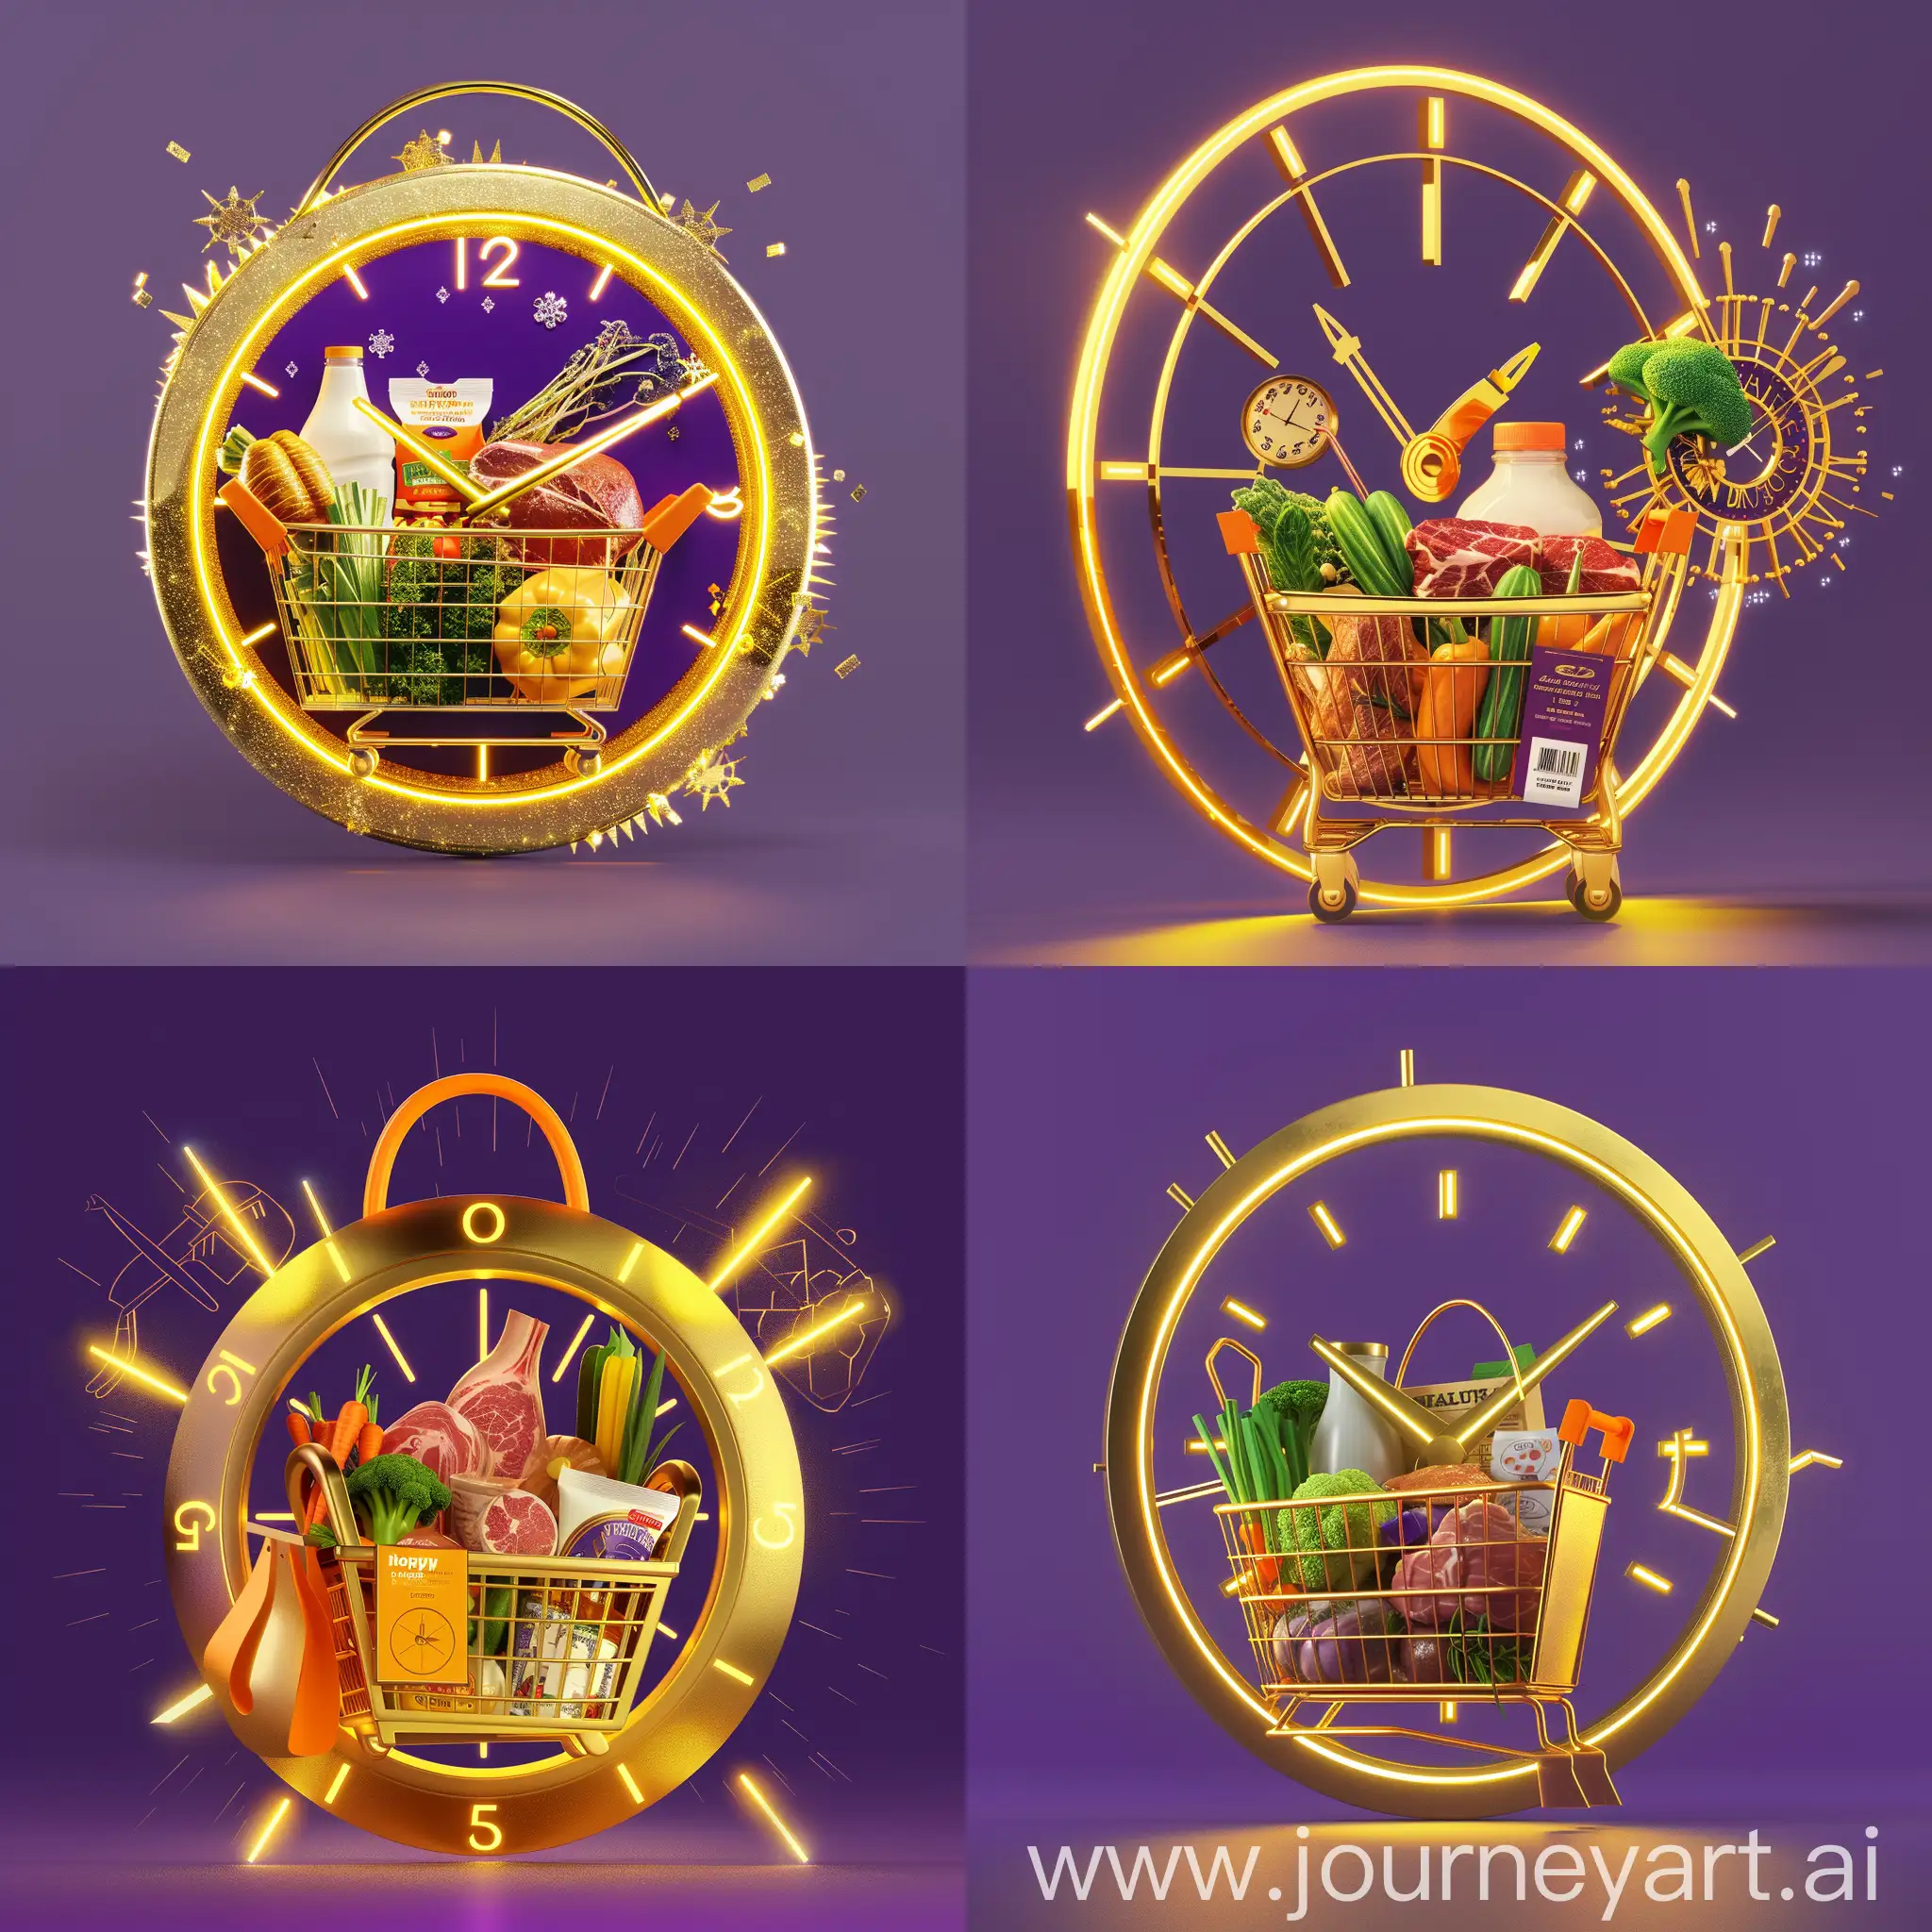 Golden-Clock-with-Shopping-Basket-Overflowing-with-Fresh-Groceries-on-Purple-Background